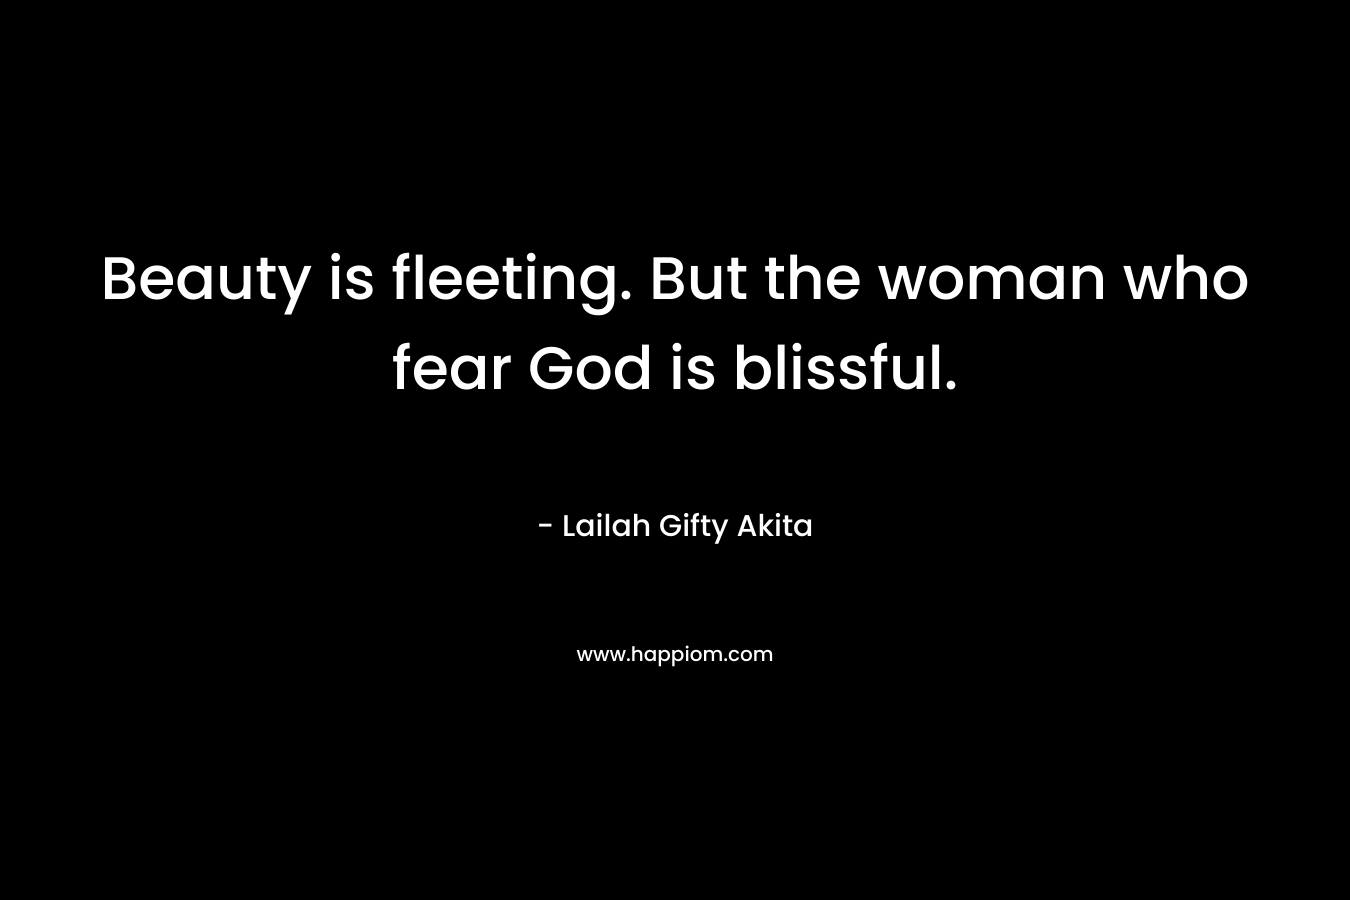 Beauty is fleeting. But the woman who fear God is blissful.